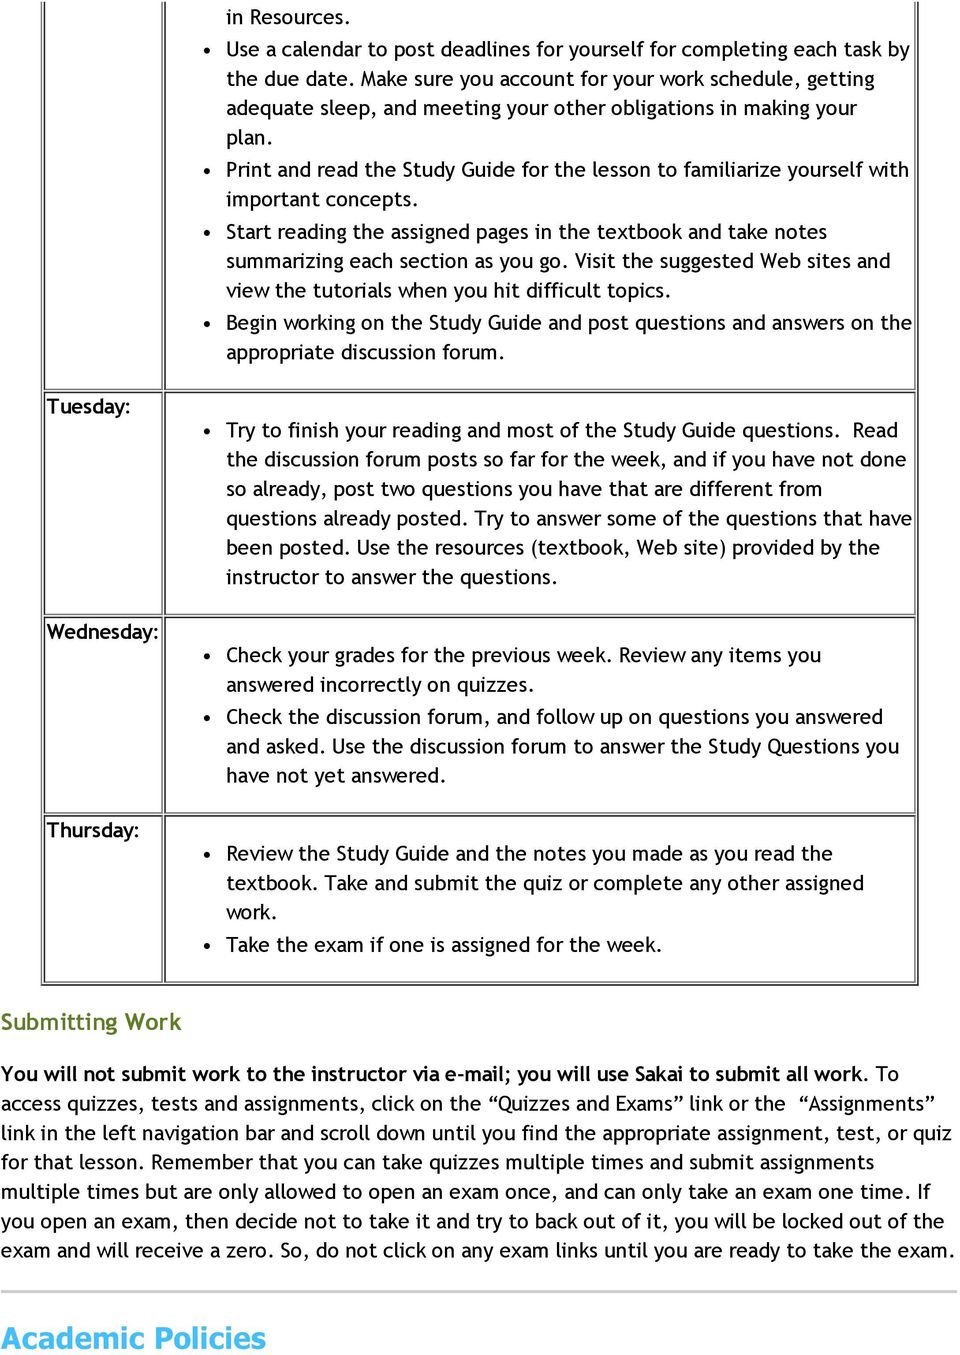 Print and read the Study Guide for the lesson to familiarize yourself with important concepts. Start reading the assigned pages in the textbook and take notes summarizing each section as you go.